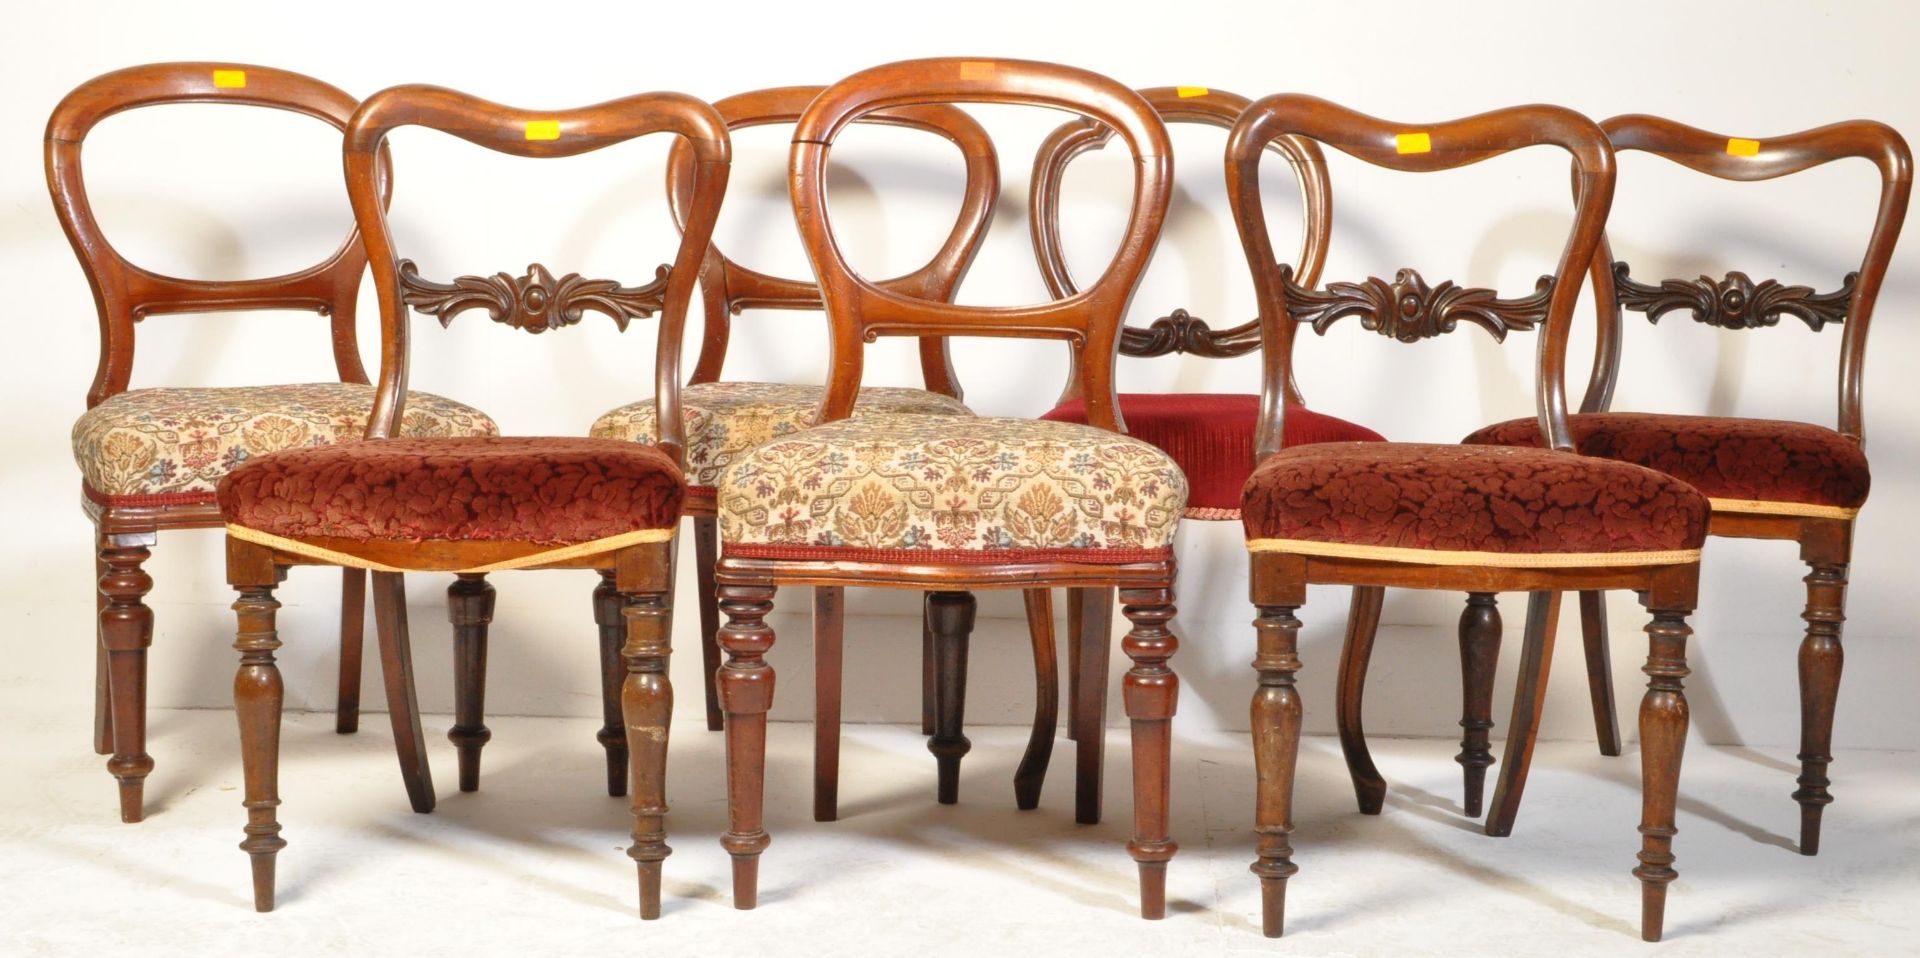 HARLEQUIN SET OF 7 VICTORIAN BALLOON & SADDLE BACK CHAIRS